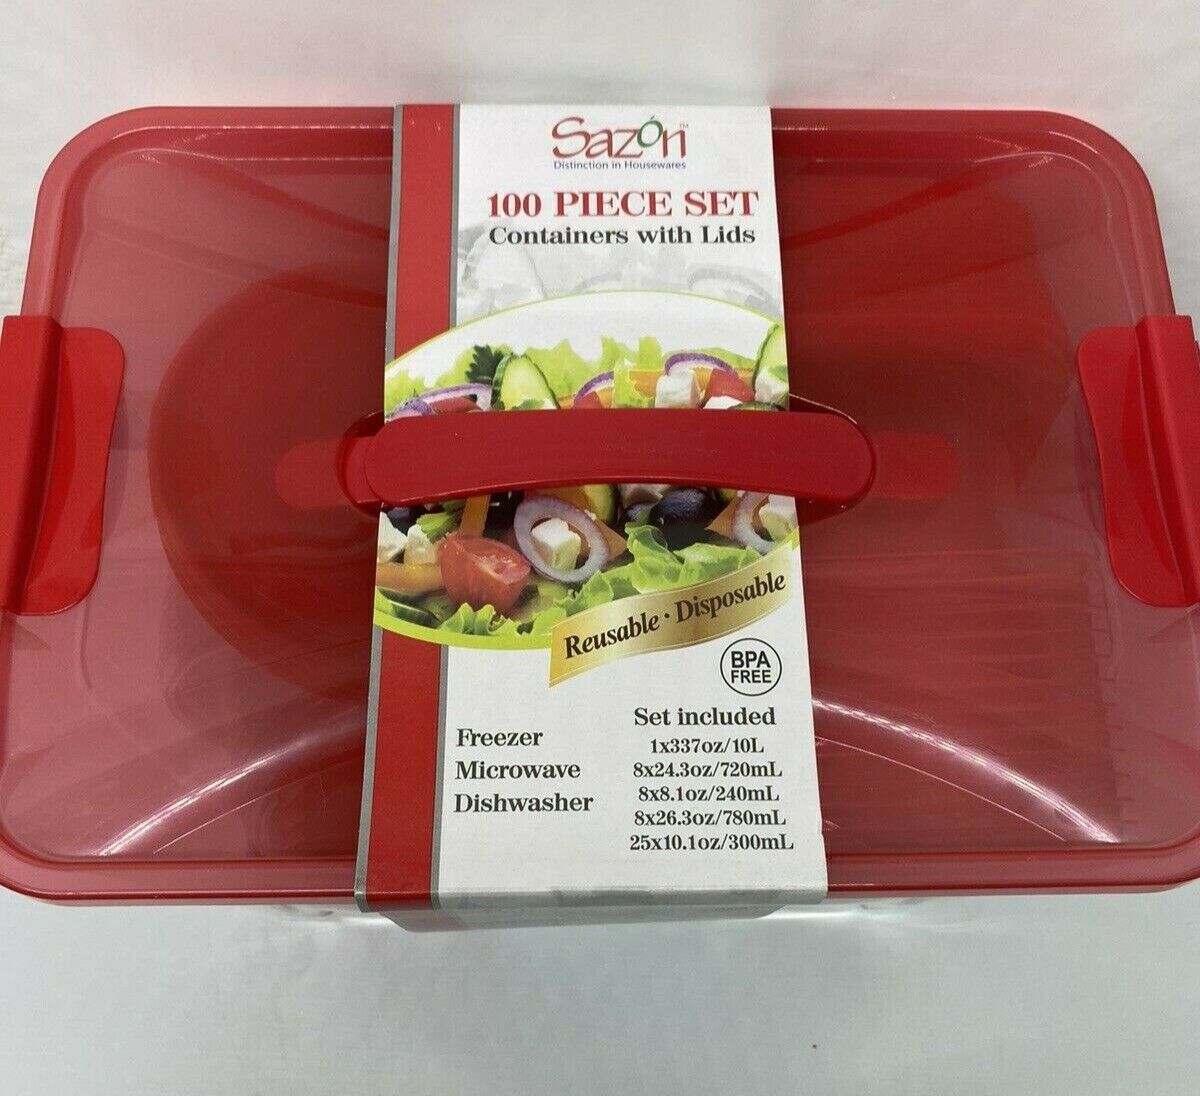 New 100pc Set containers with red plastic lids, reusable, disposable Sazon